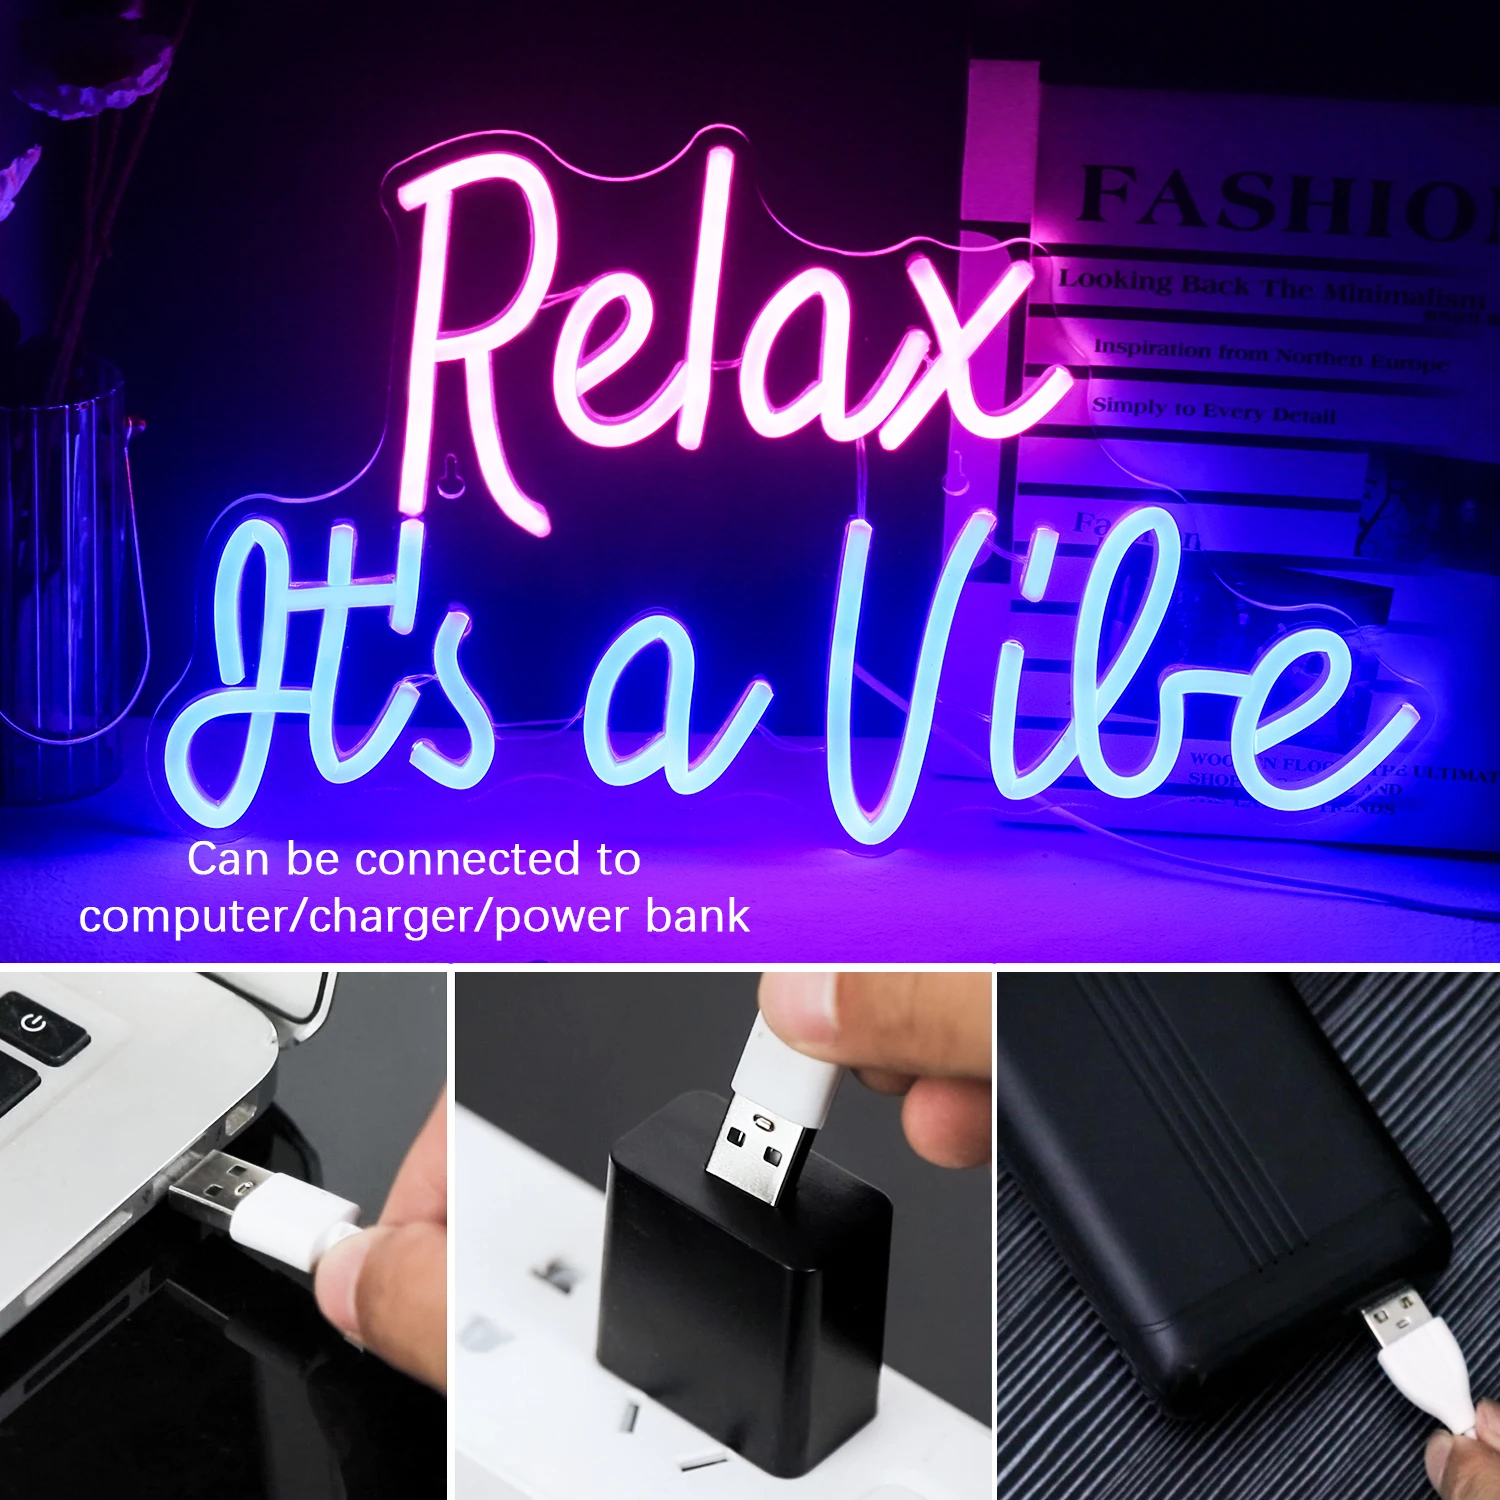 Relax It's a Vibe Neon Sign LED Room Wall Decor USB Powered For Party Bedroom Game Room Club Party Gaming Light Man Cave Decor